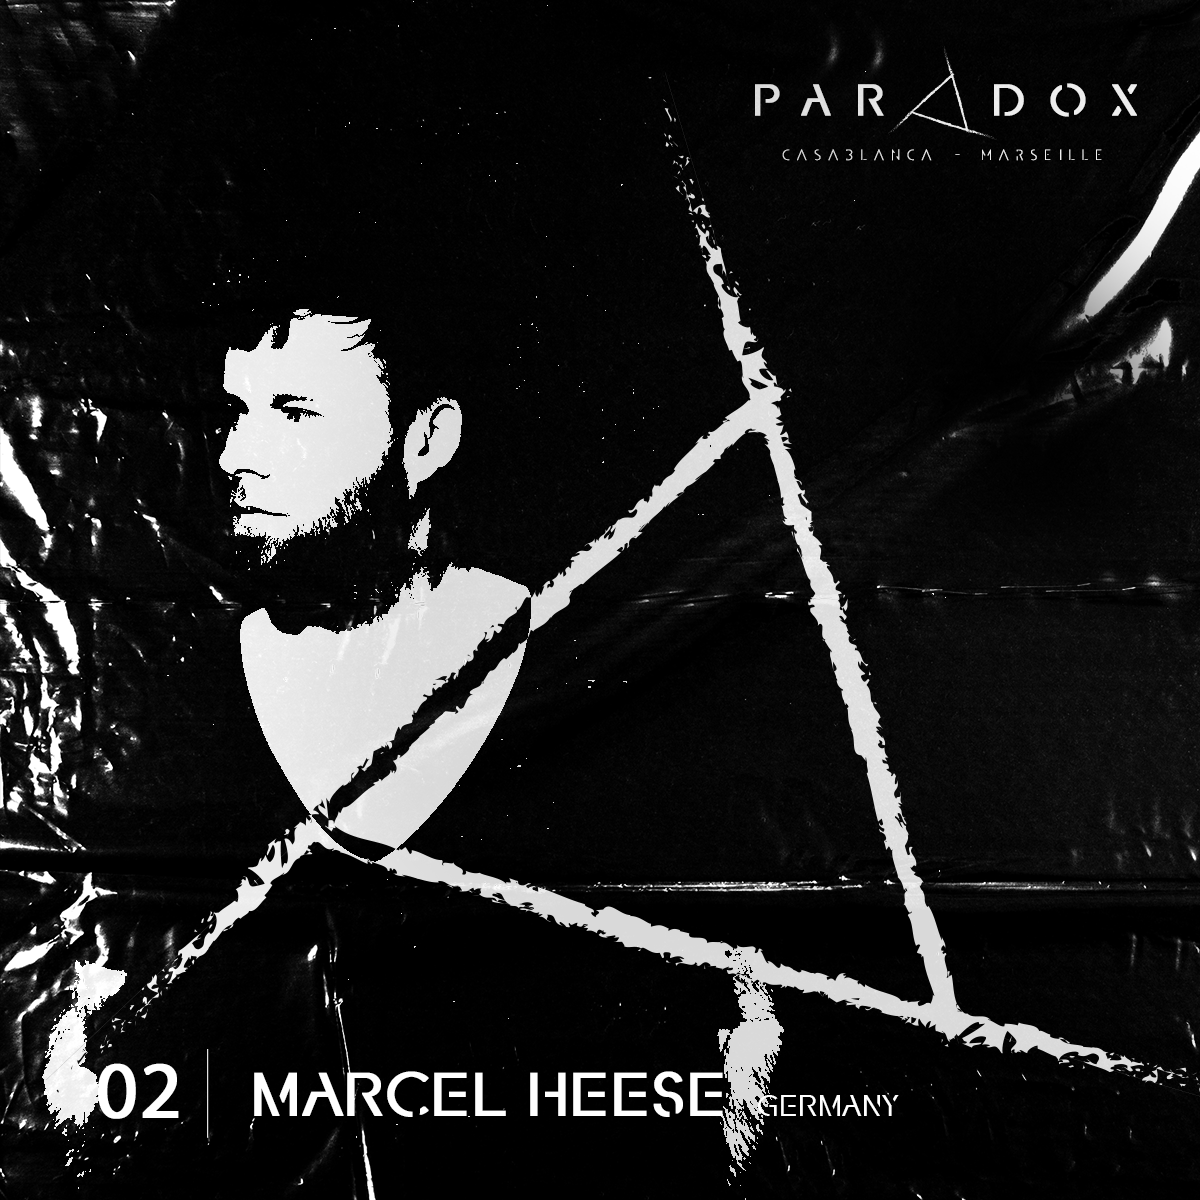 black and white paradox techno podcast cover number 02 with MARCEL HEESE